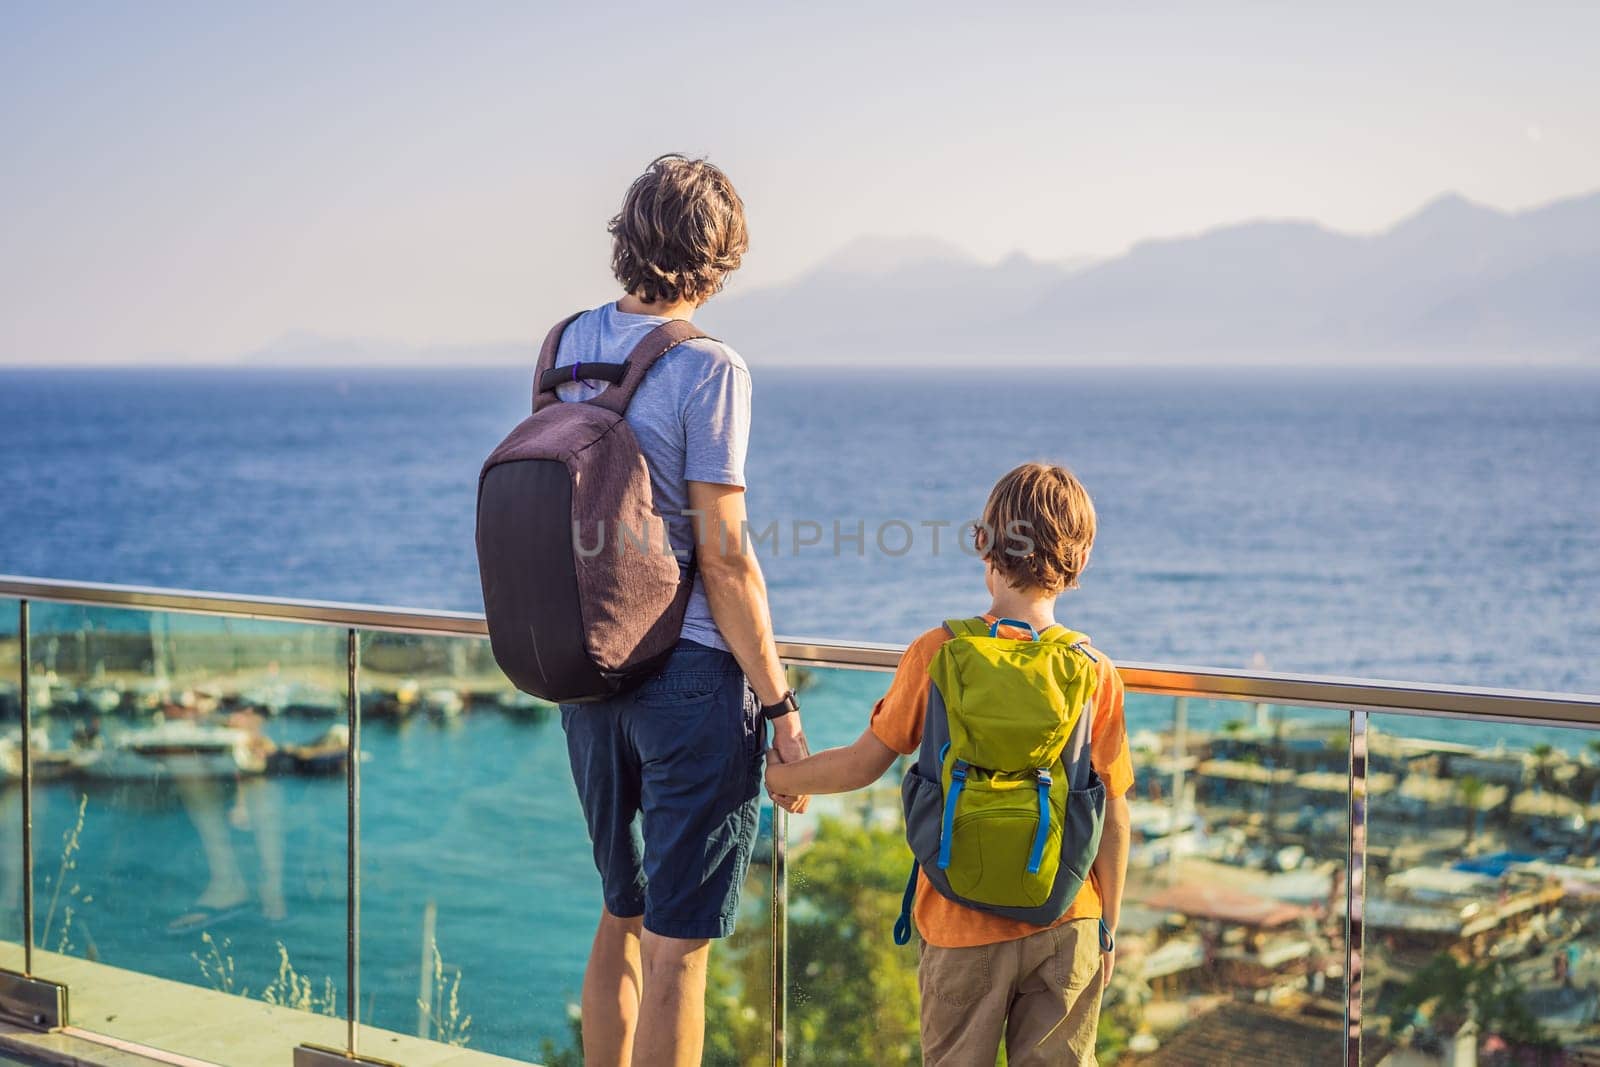 Father and son tourists in Old town Kaleici in Antalya. Turkiye. Panoramic view of Antalya Old Town port, Taurus mountains and Mediterrranean Sea, Turkey. Traveling with kids concept.